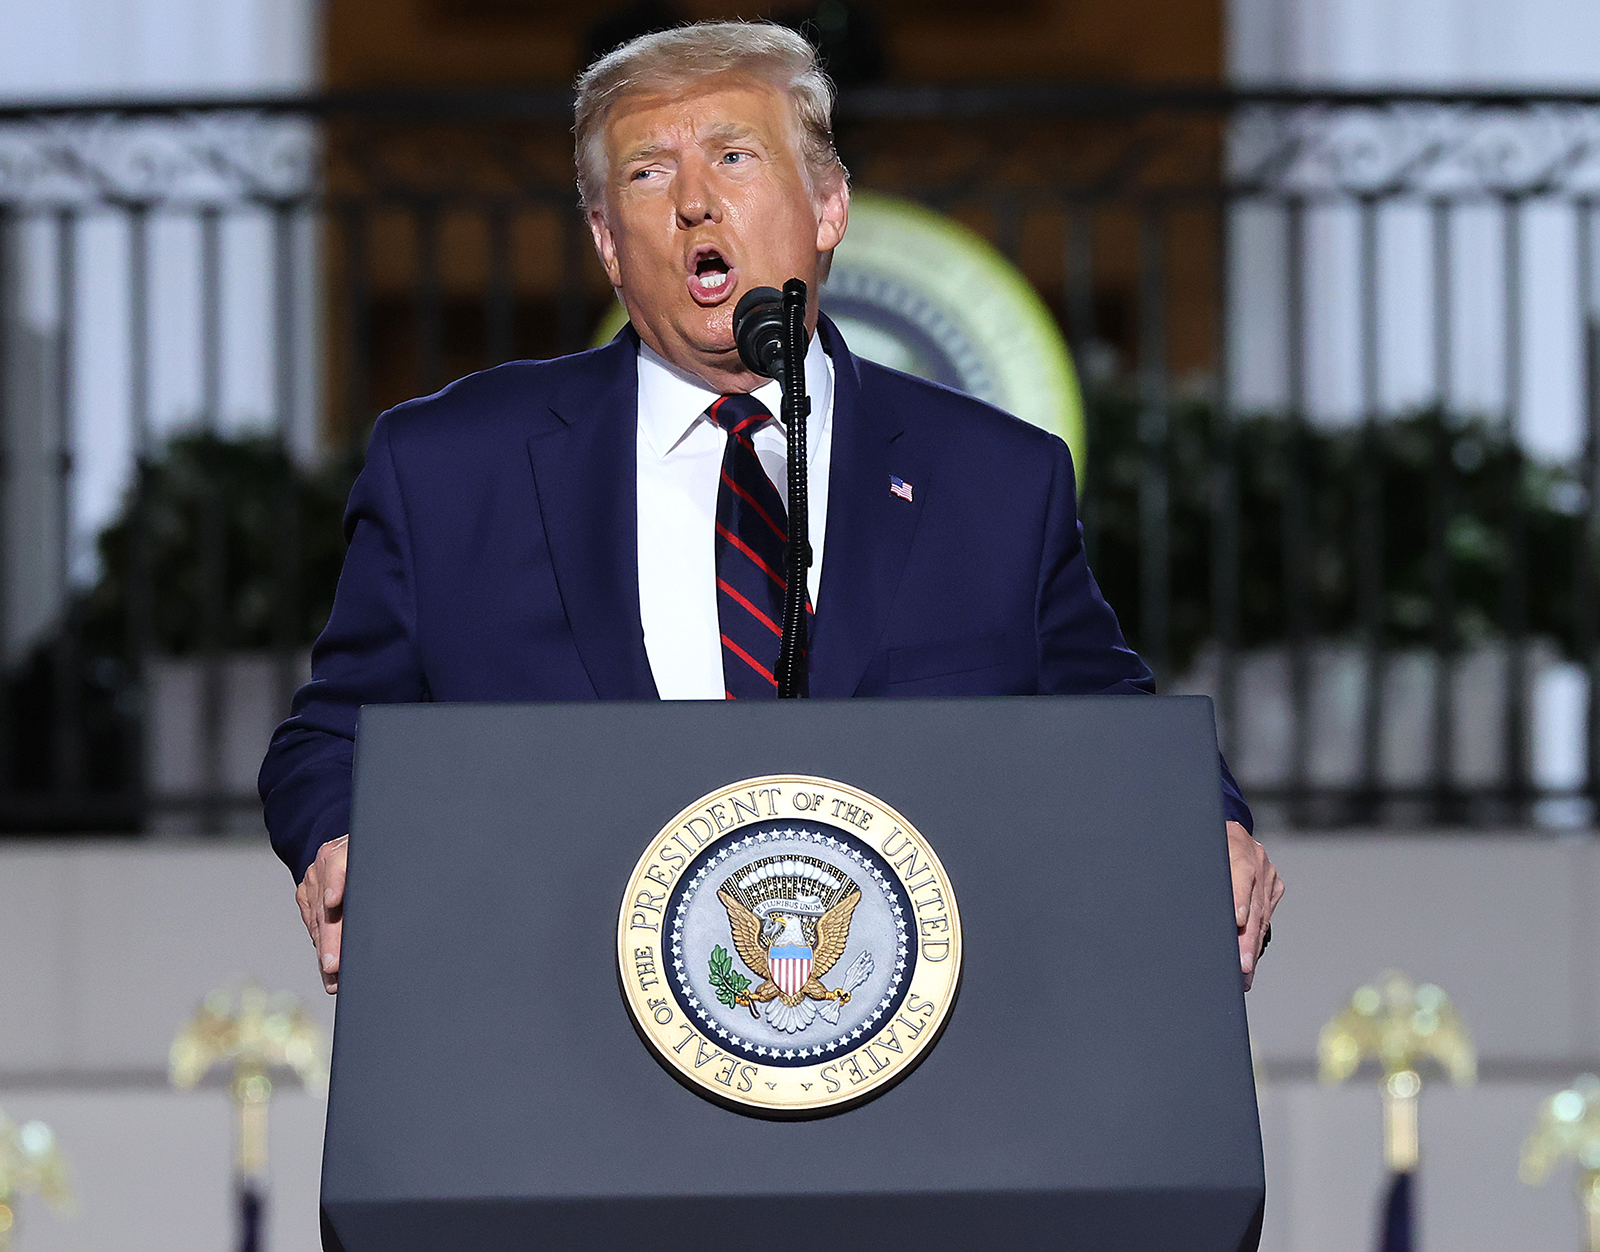 President Donald Trump delivers his acceptance speech for the Republican presidential nomination on the South Lawn of the White House on Thursday in Washington.